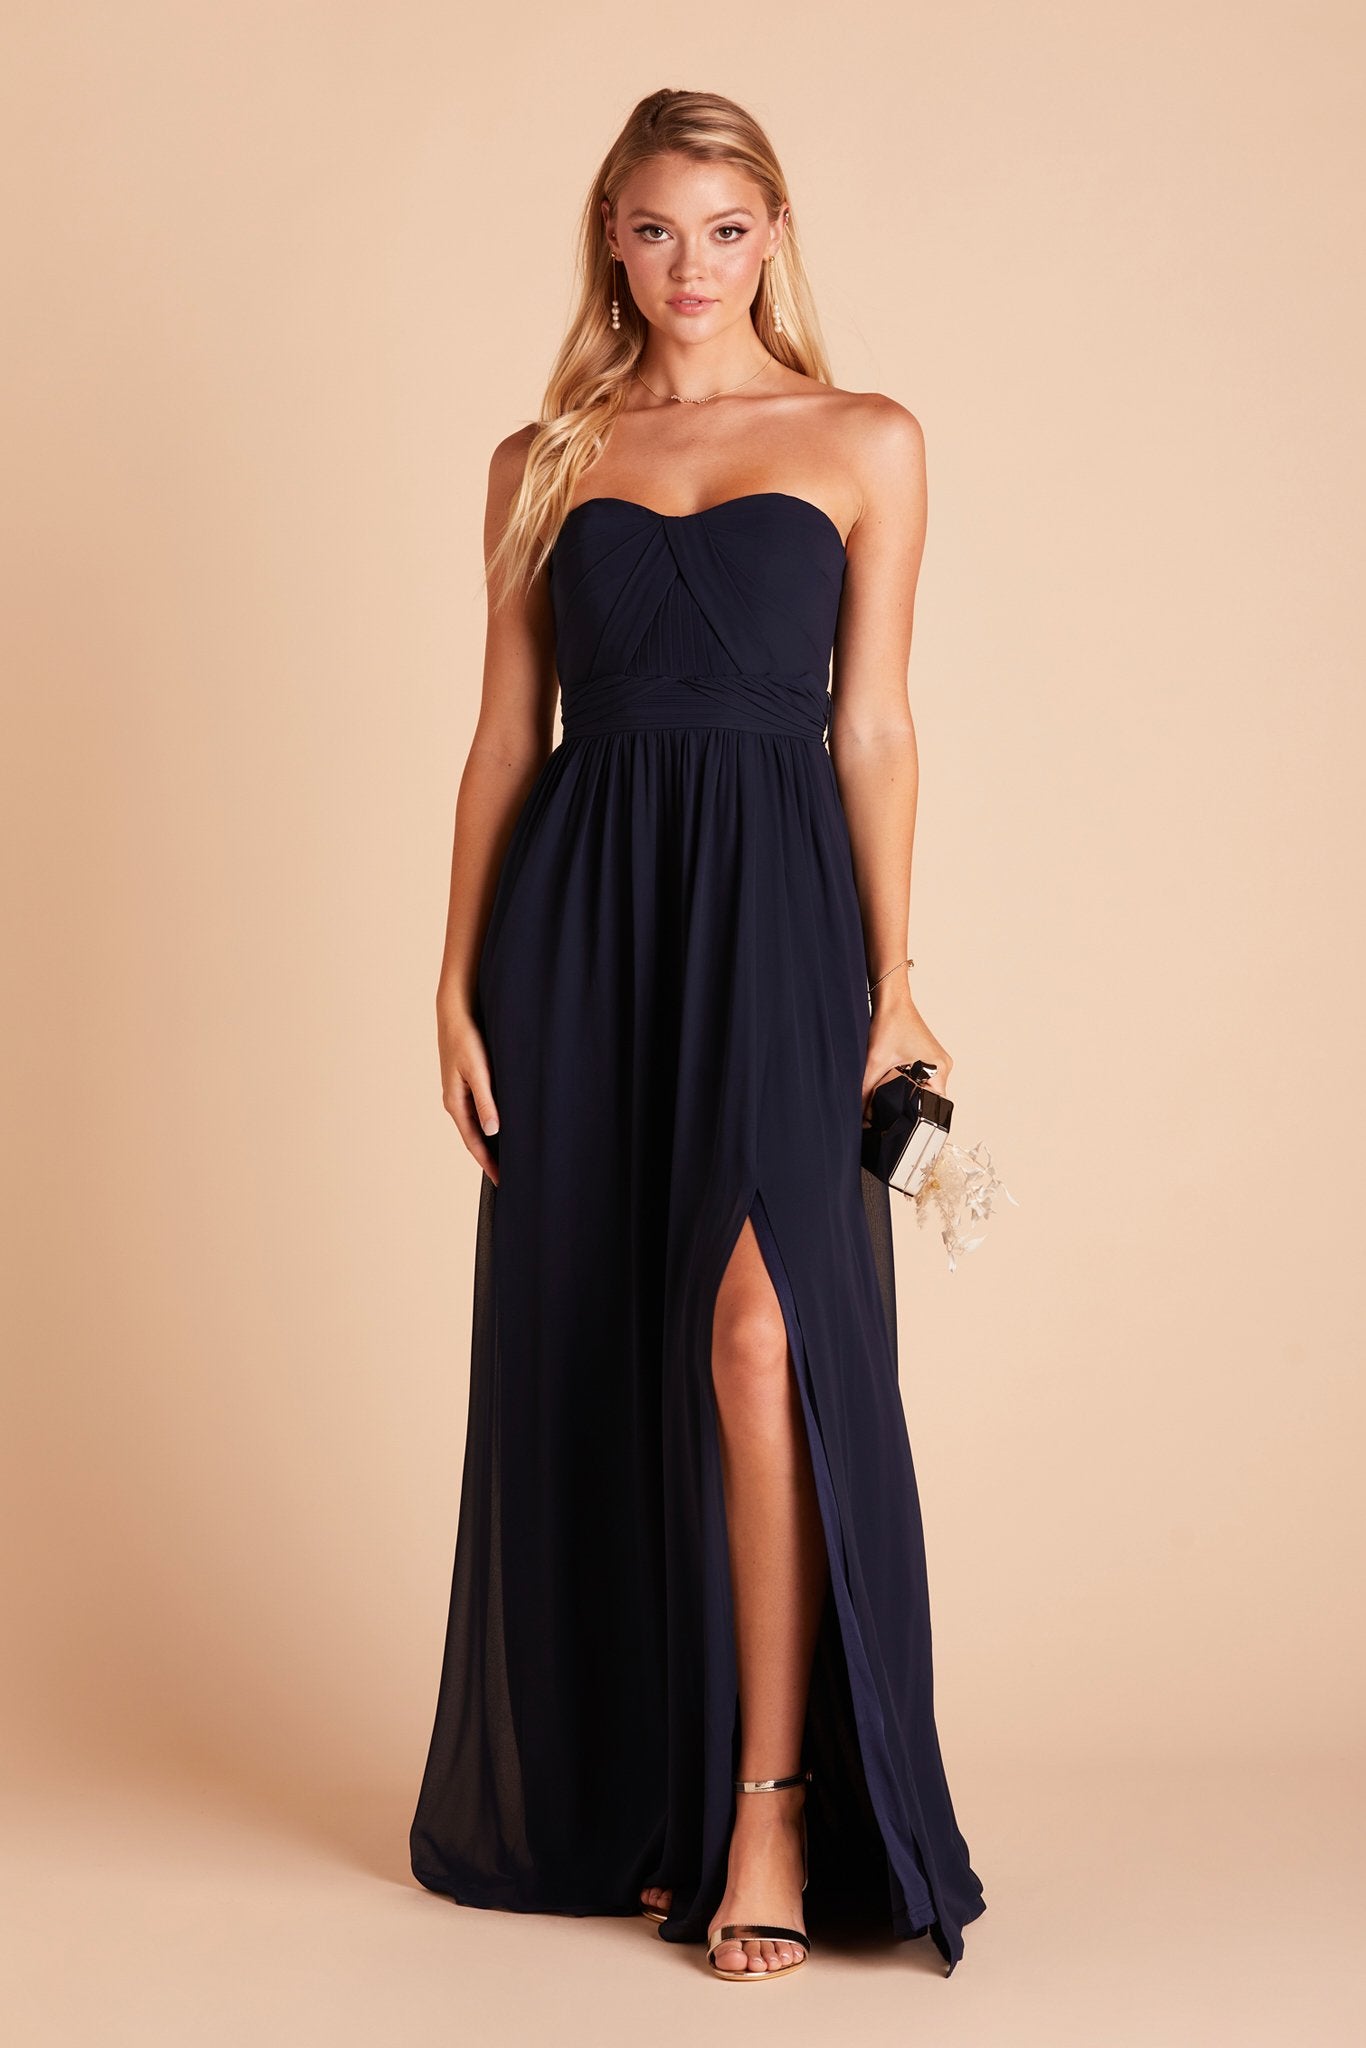 Grace convertible bridesmaid dress with slit in navy blue chiffon by Birdy Grey, front view